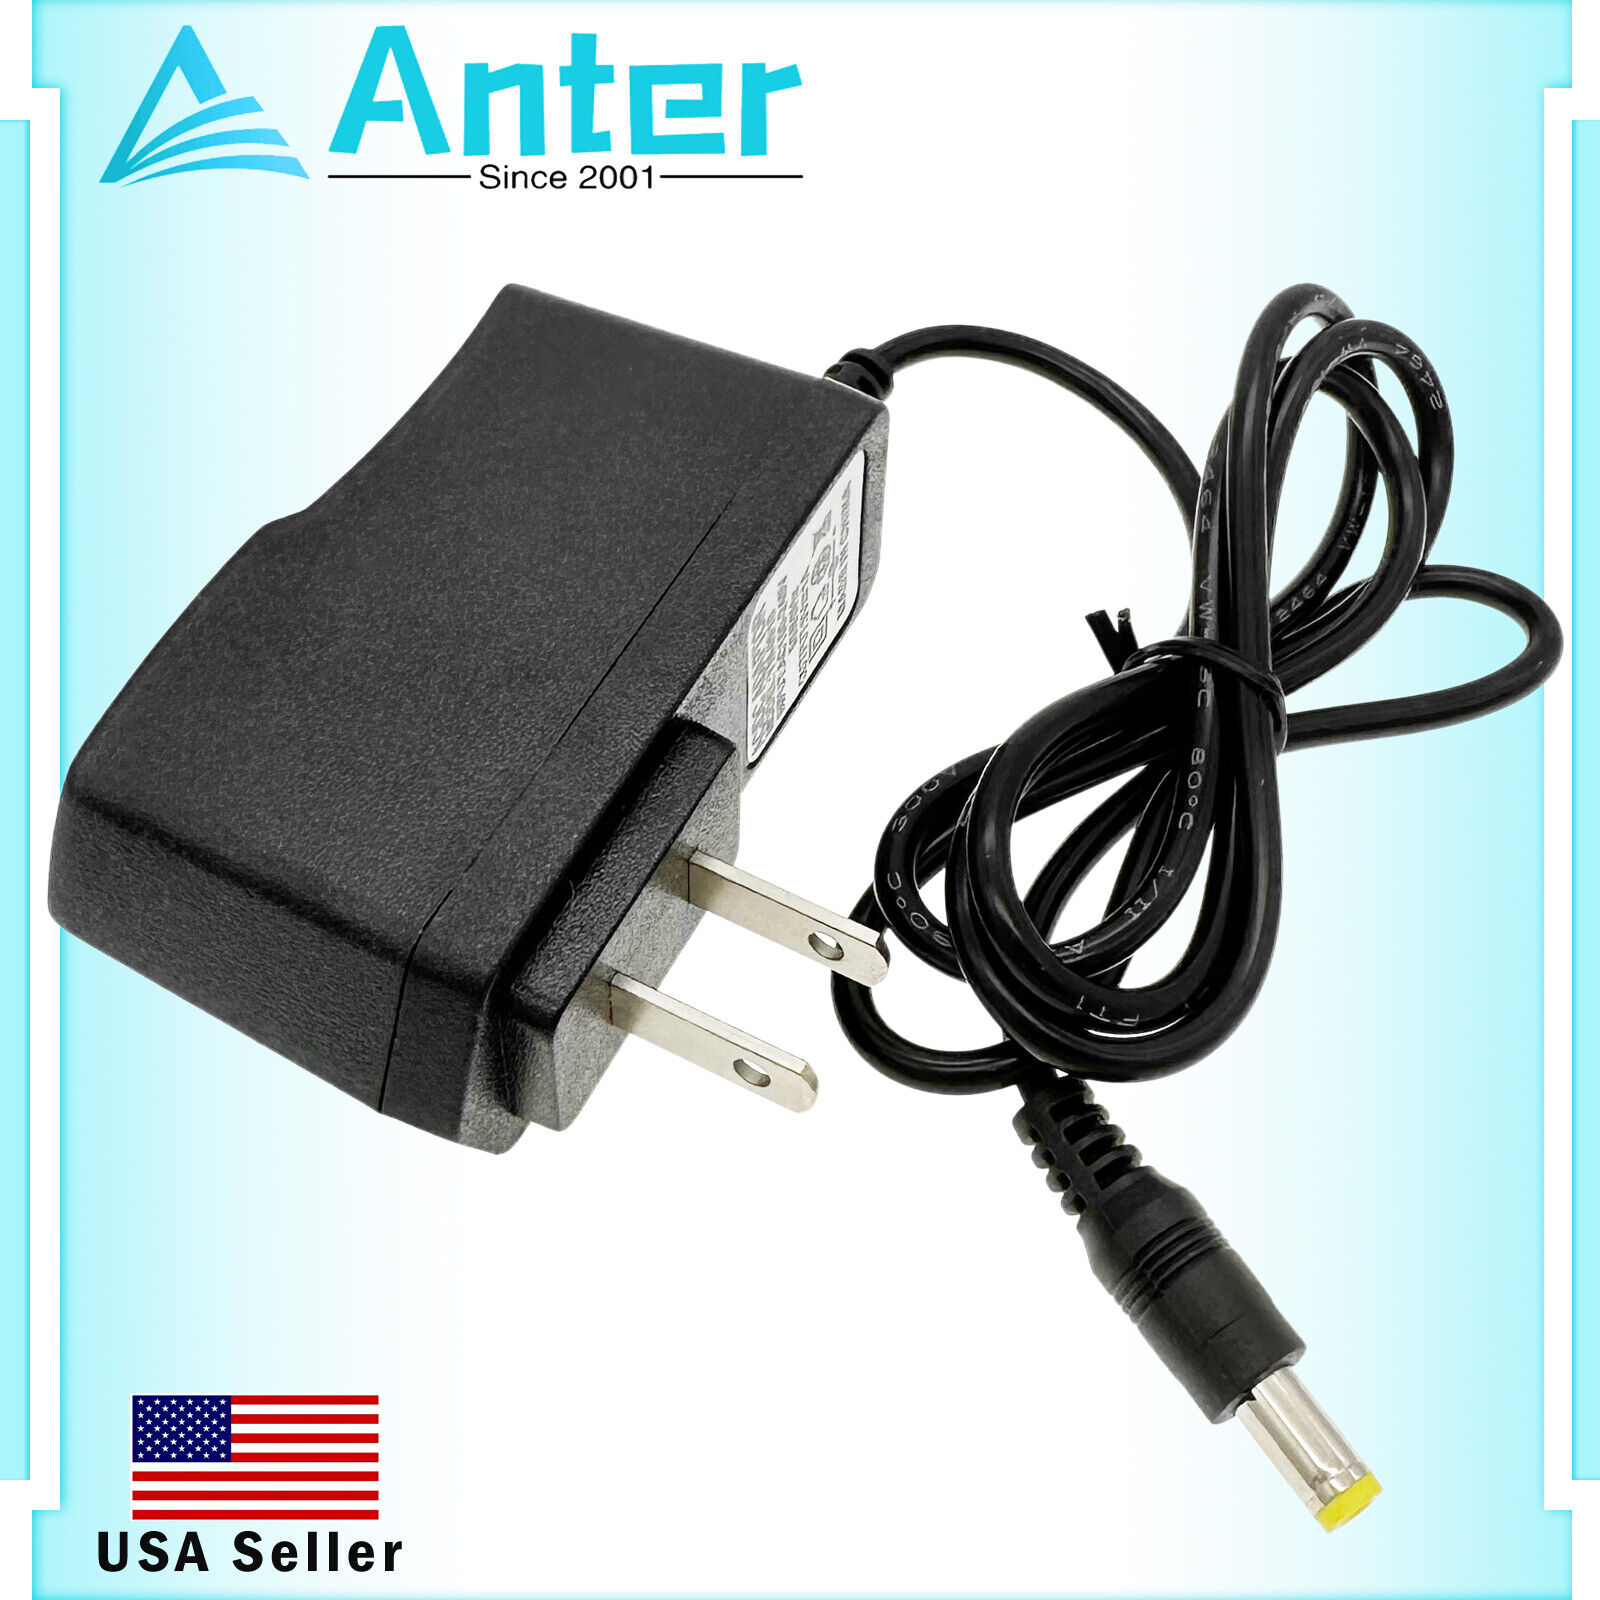 9V AC DC Adapter Power Charger For Casio CTK-451 CTK-571 CTK-810 LK-300TV LK-220